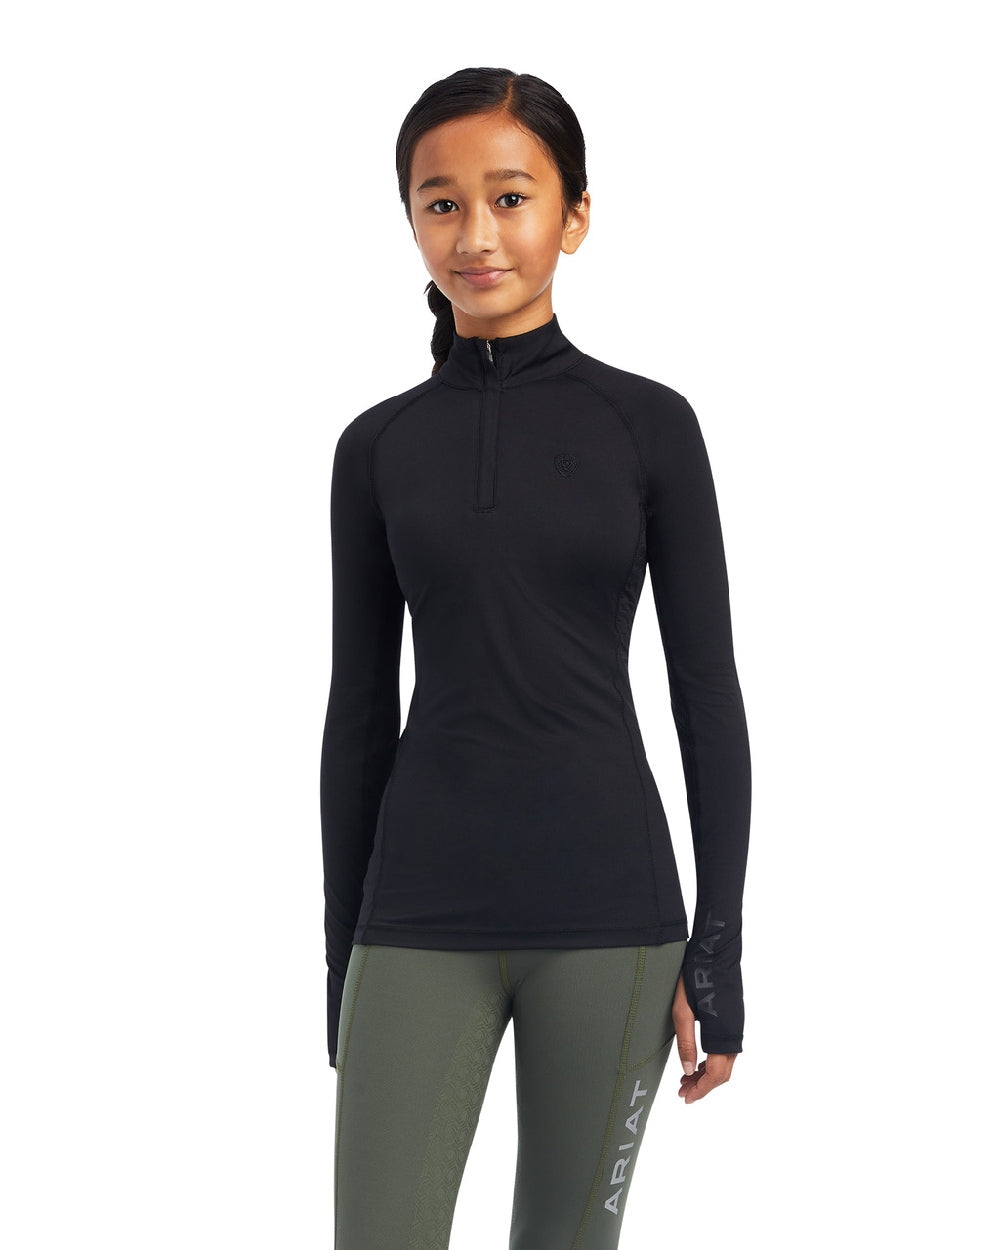 Ariat Childrens Lowell 2.0 1/4 Zip Base Layer in Black 